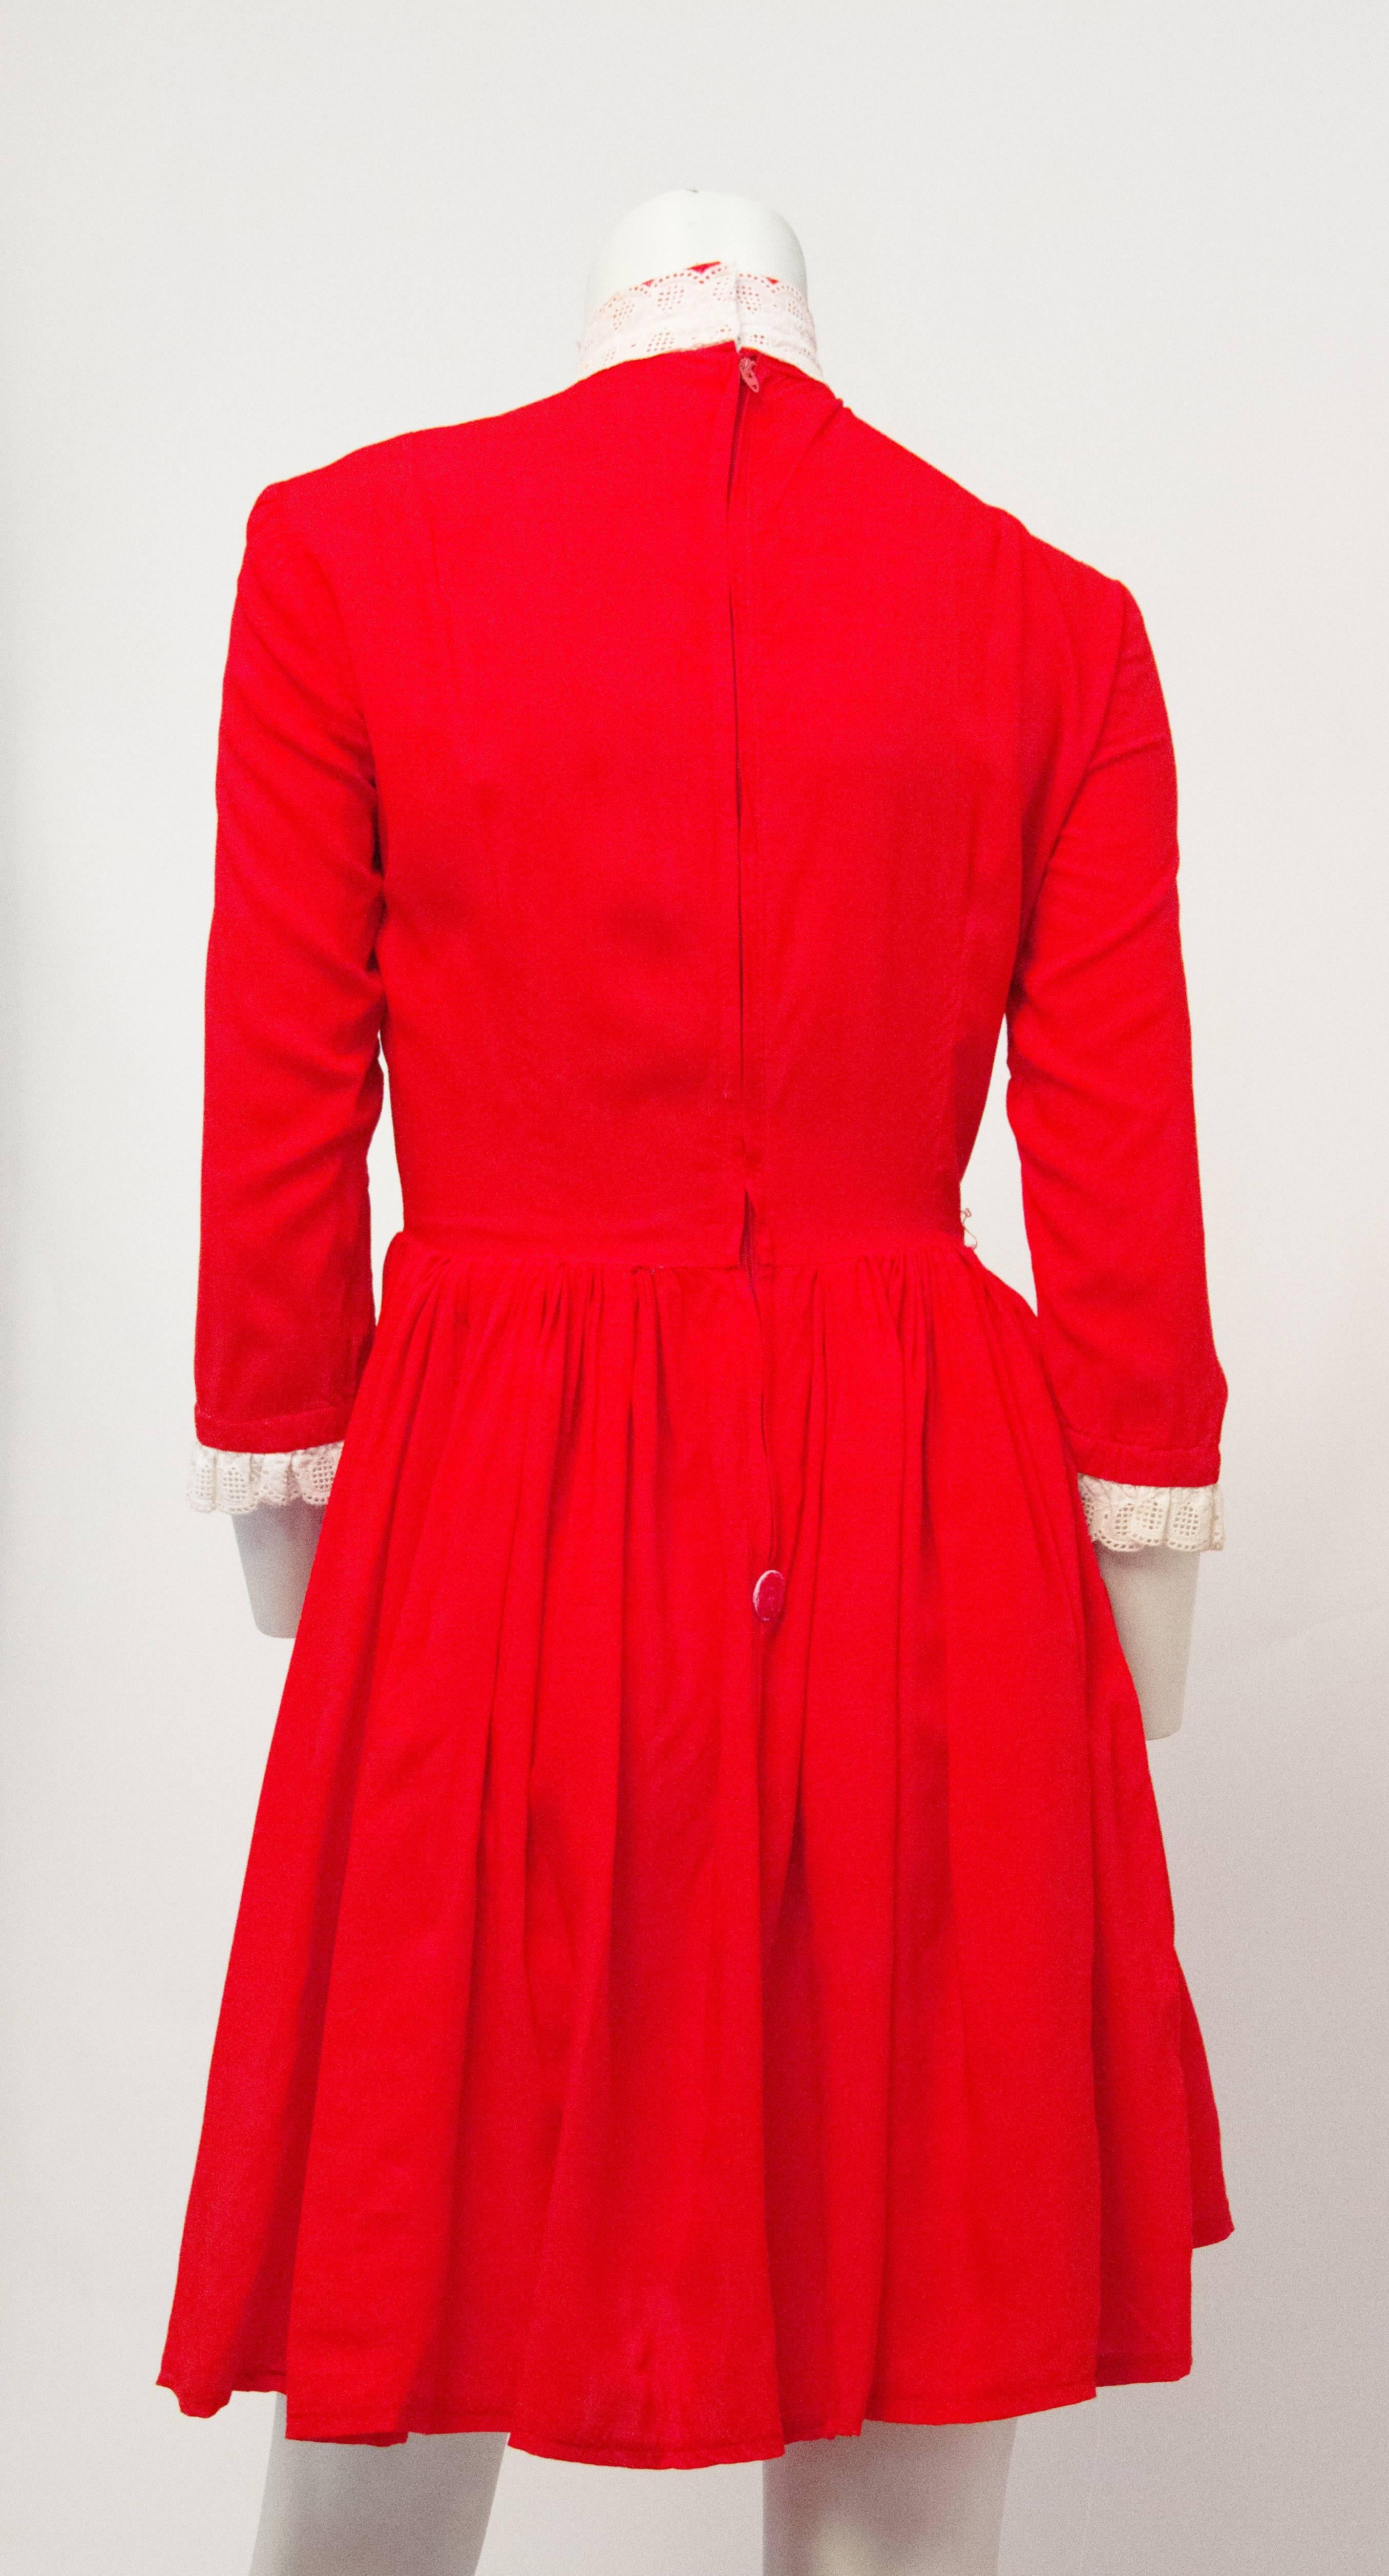 60s red princess seam babydoll dress with white eyelet trim on collar and cuffs. Nylon zipper up the back. 